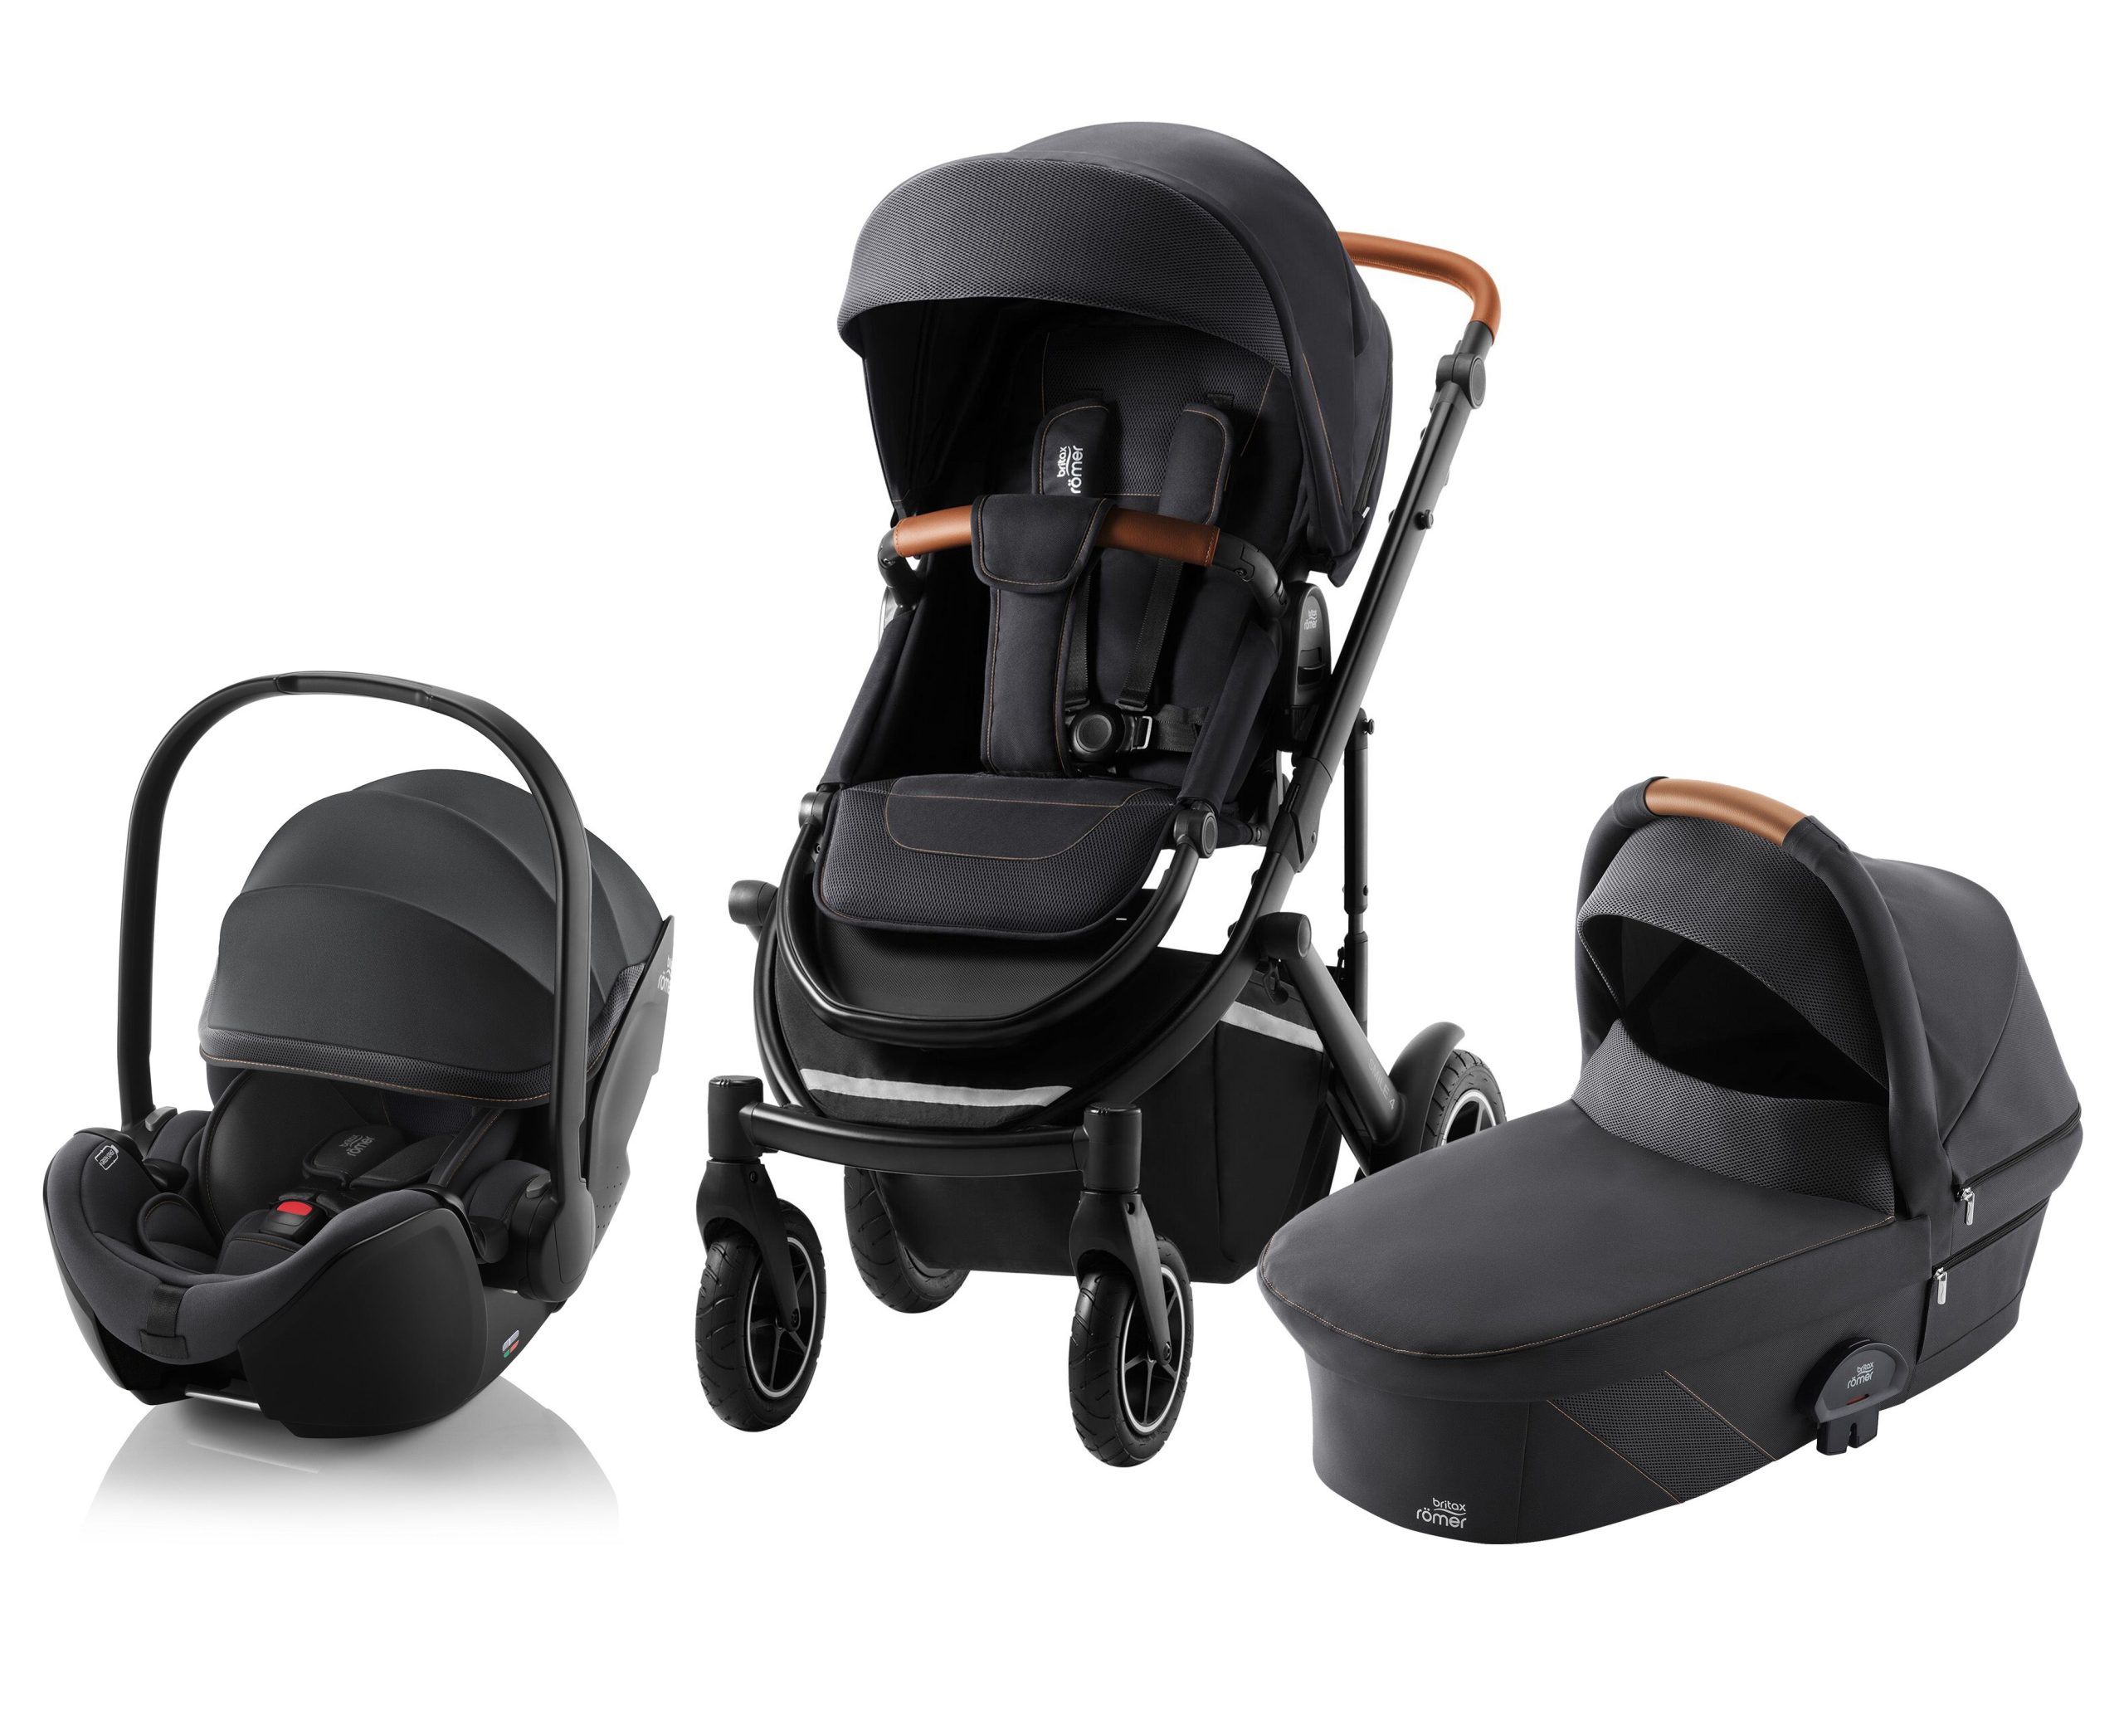 Featured image for “Britax Römer Smile 4 Duovagn inkl. Baby-Safe 5Z, Fossil Grey”